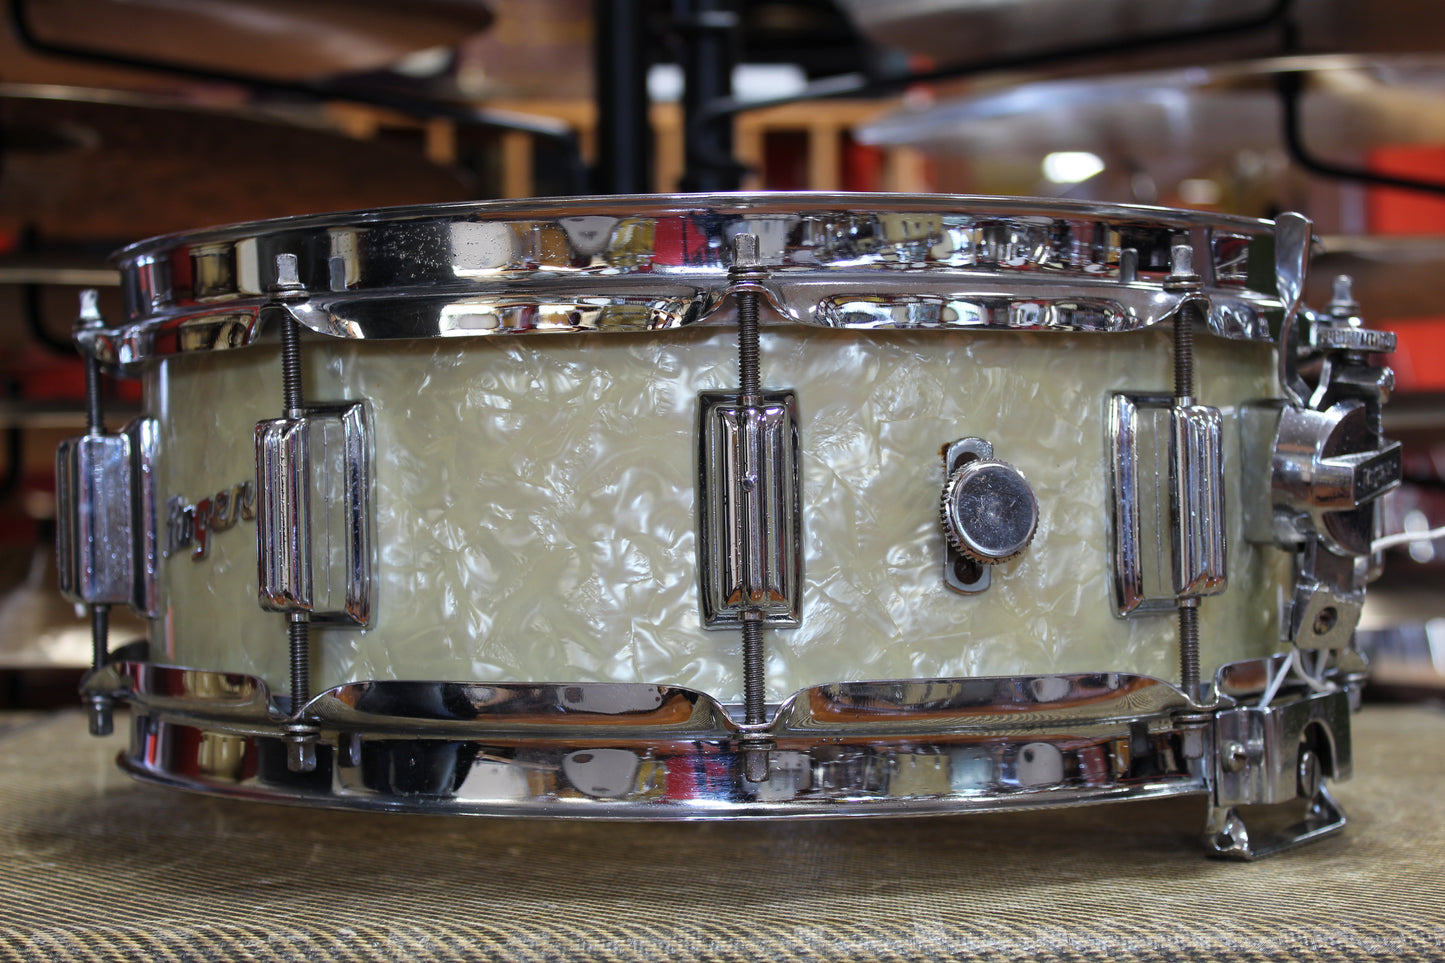 1960s Rogers Dynasonic Snare Drum 5"x14" in White Marine Pearl